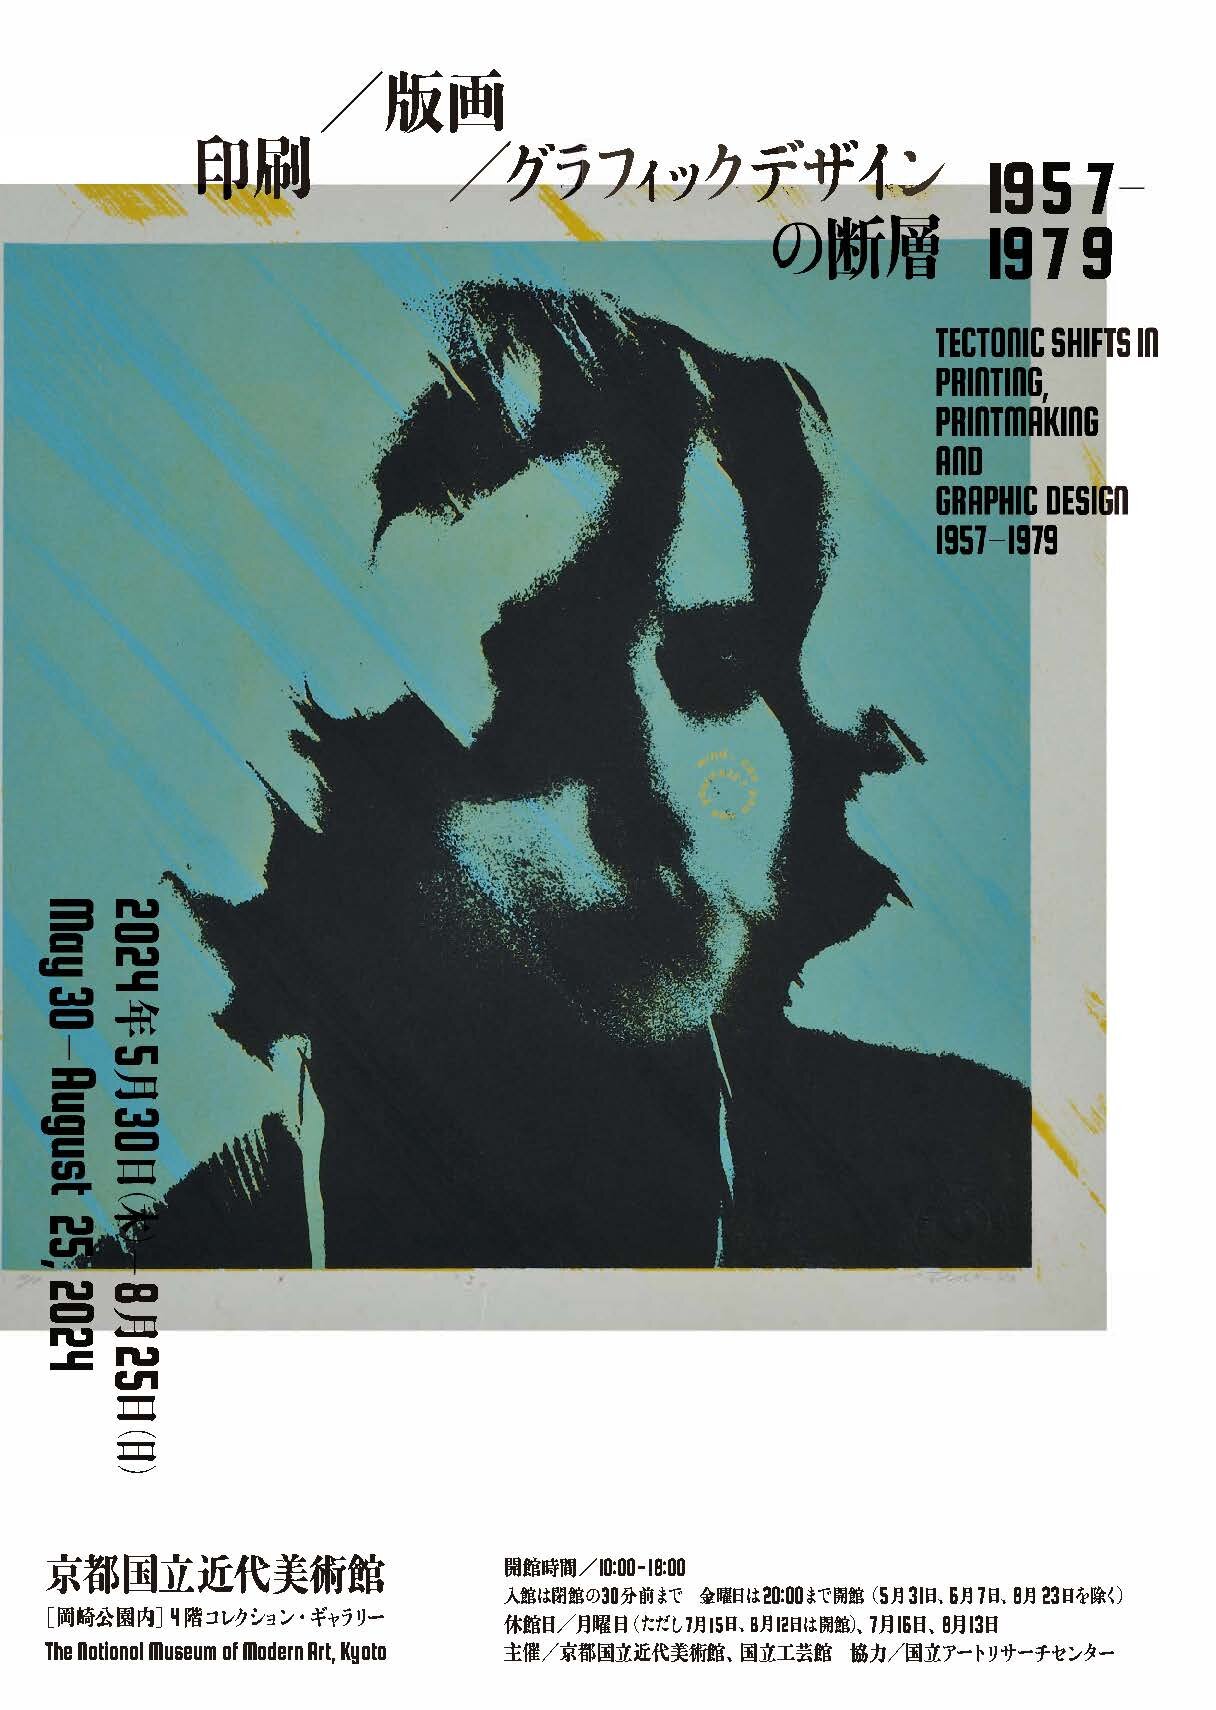 Venue: The National Museum of Modern Art, Kyoto | Tectonic Shifts in Printing, Printmaking and Graphic Design 1957-1979


